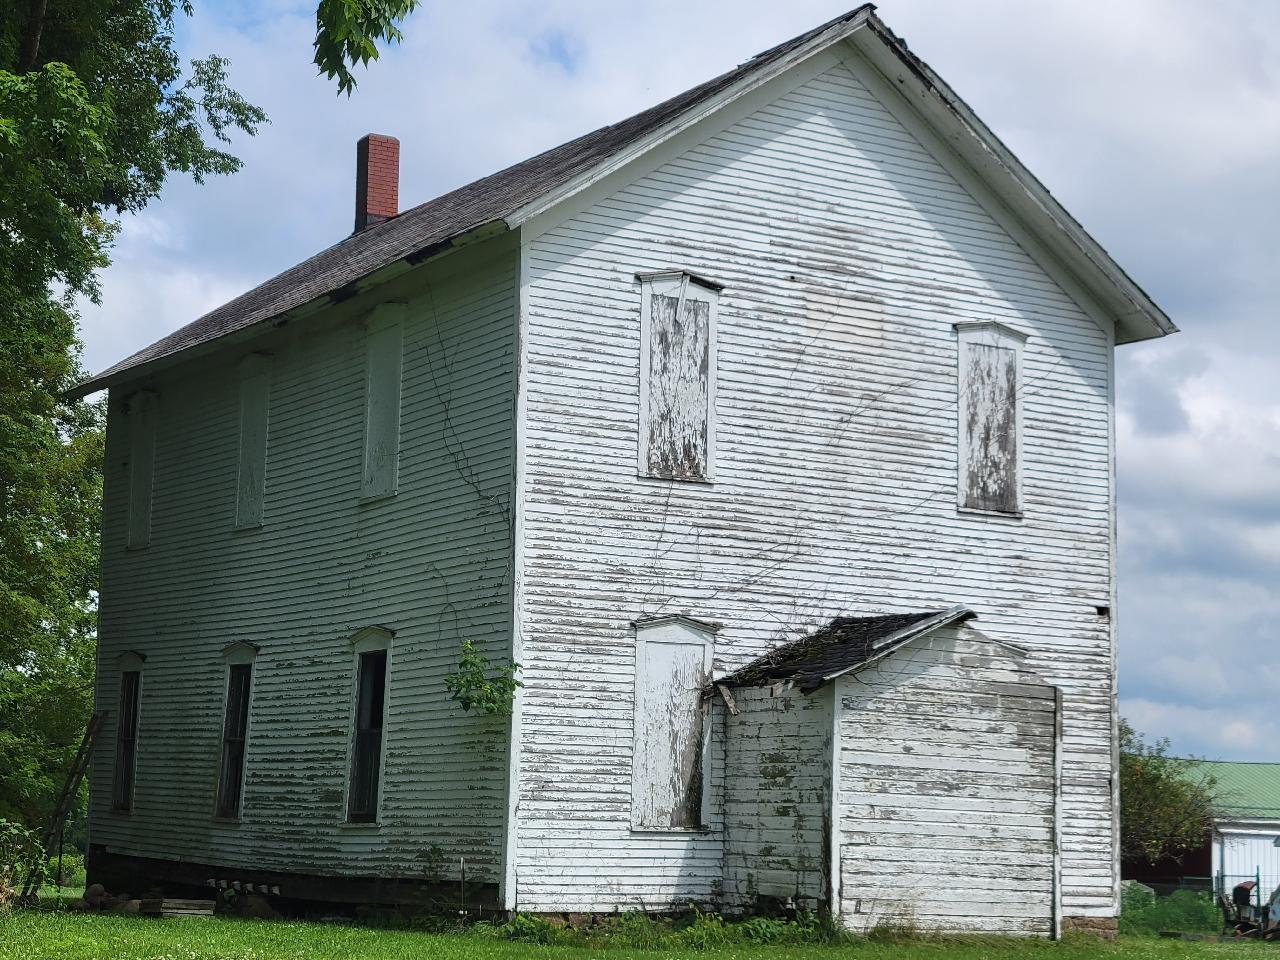 Little Corners Schoolhouse, Saegertown, Crawford County